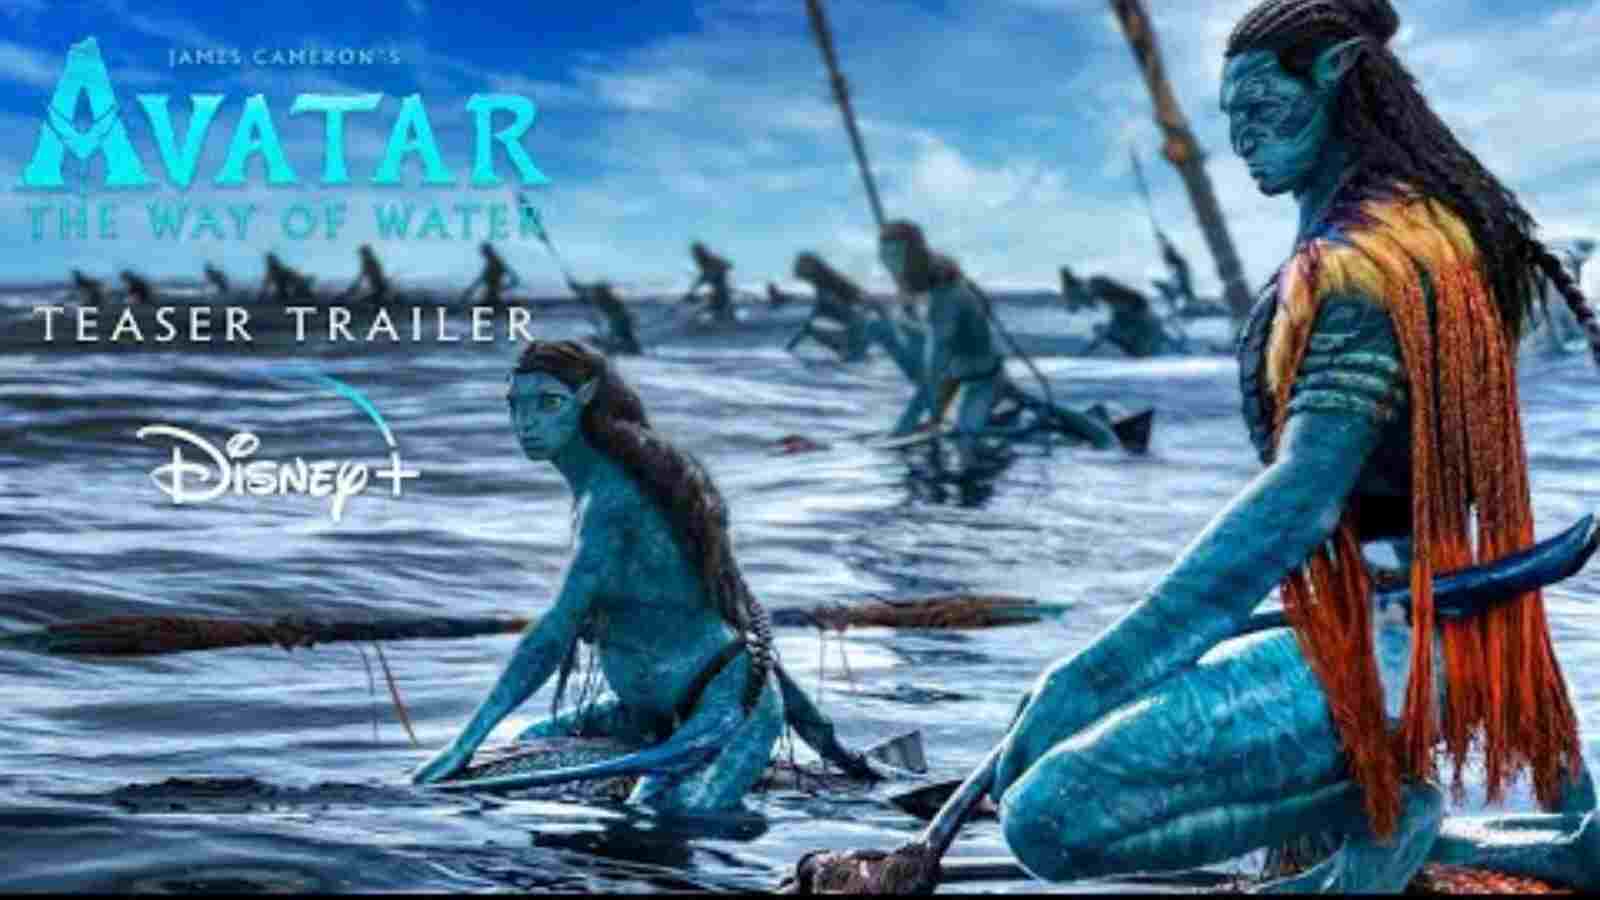 Is James Cameron Unnecessarily Stretching The 'Avatar' Franchise